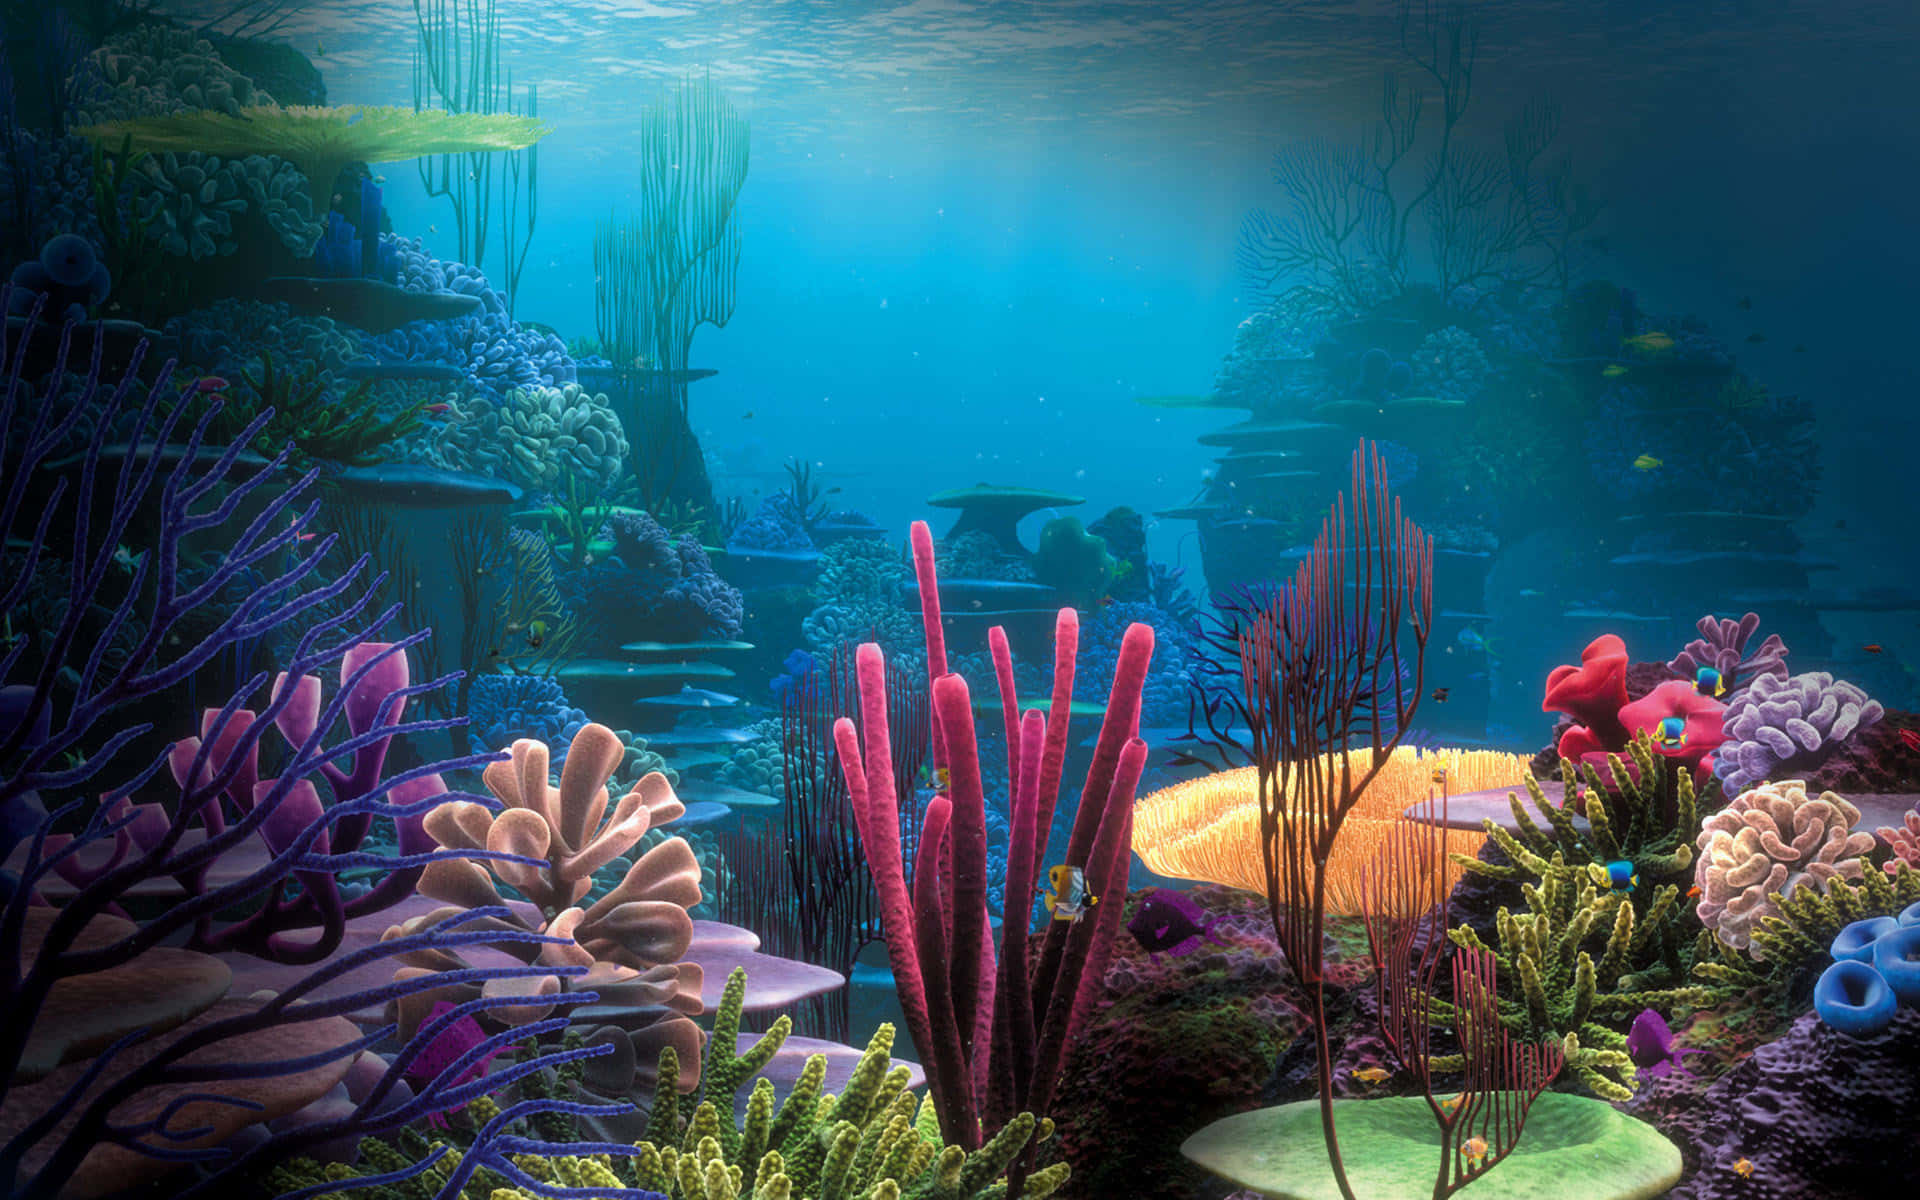 "A beautiful and peaceful underwater paradise"